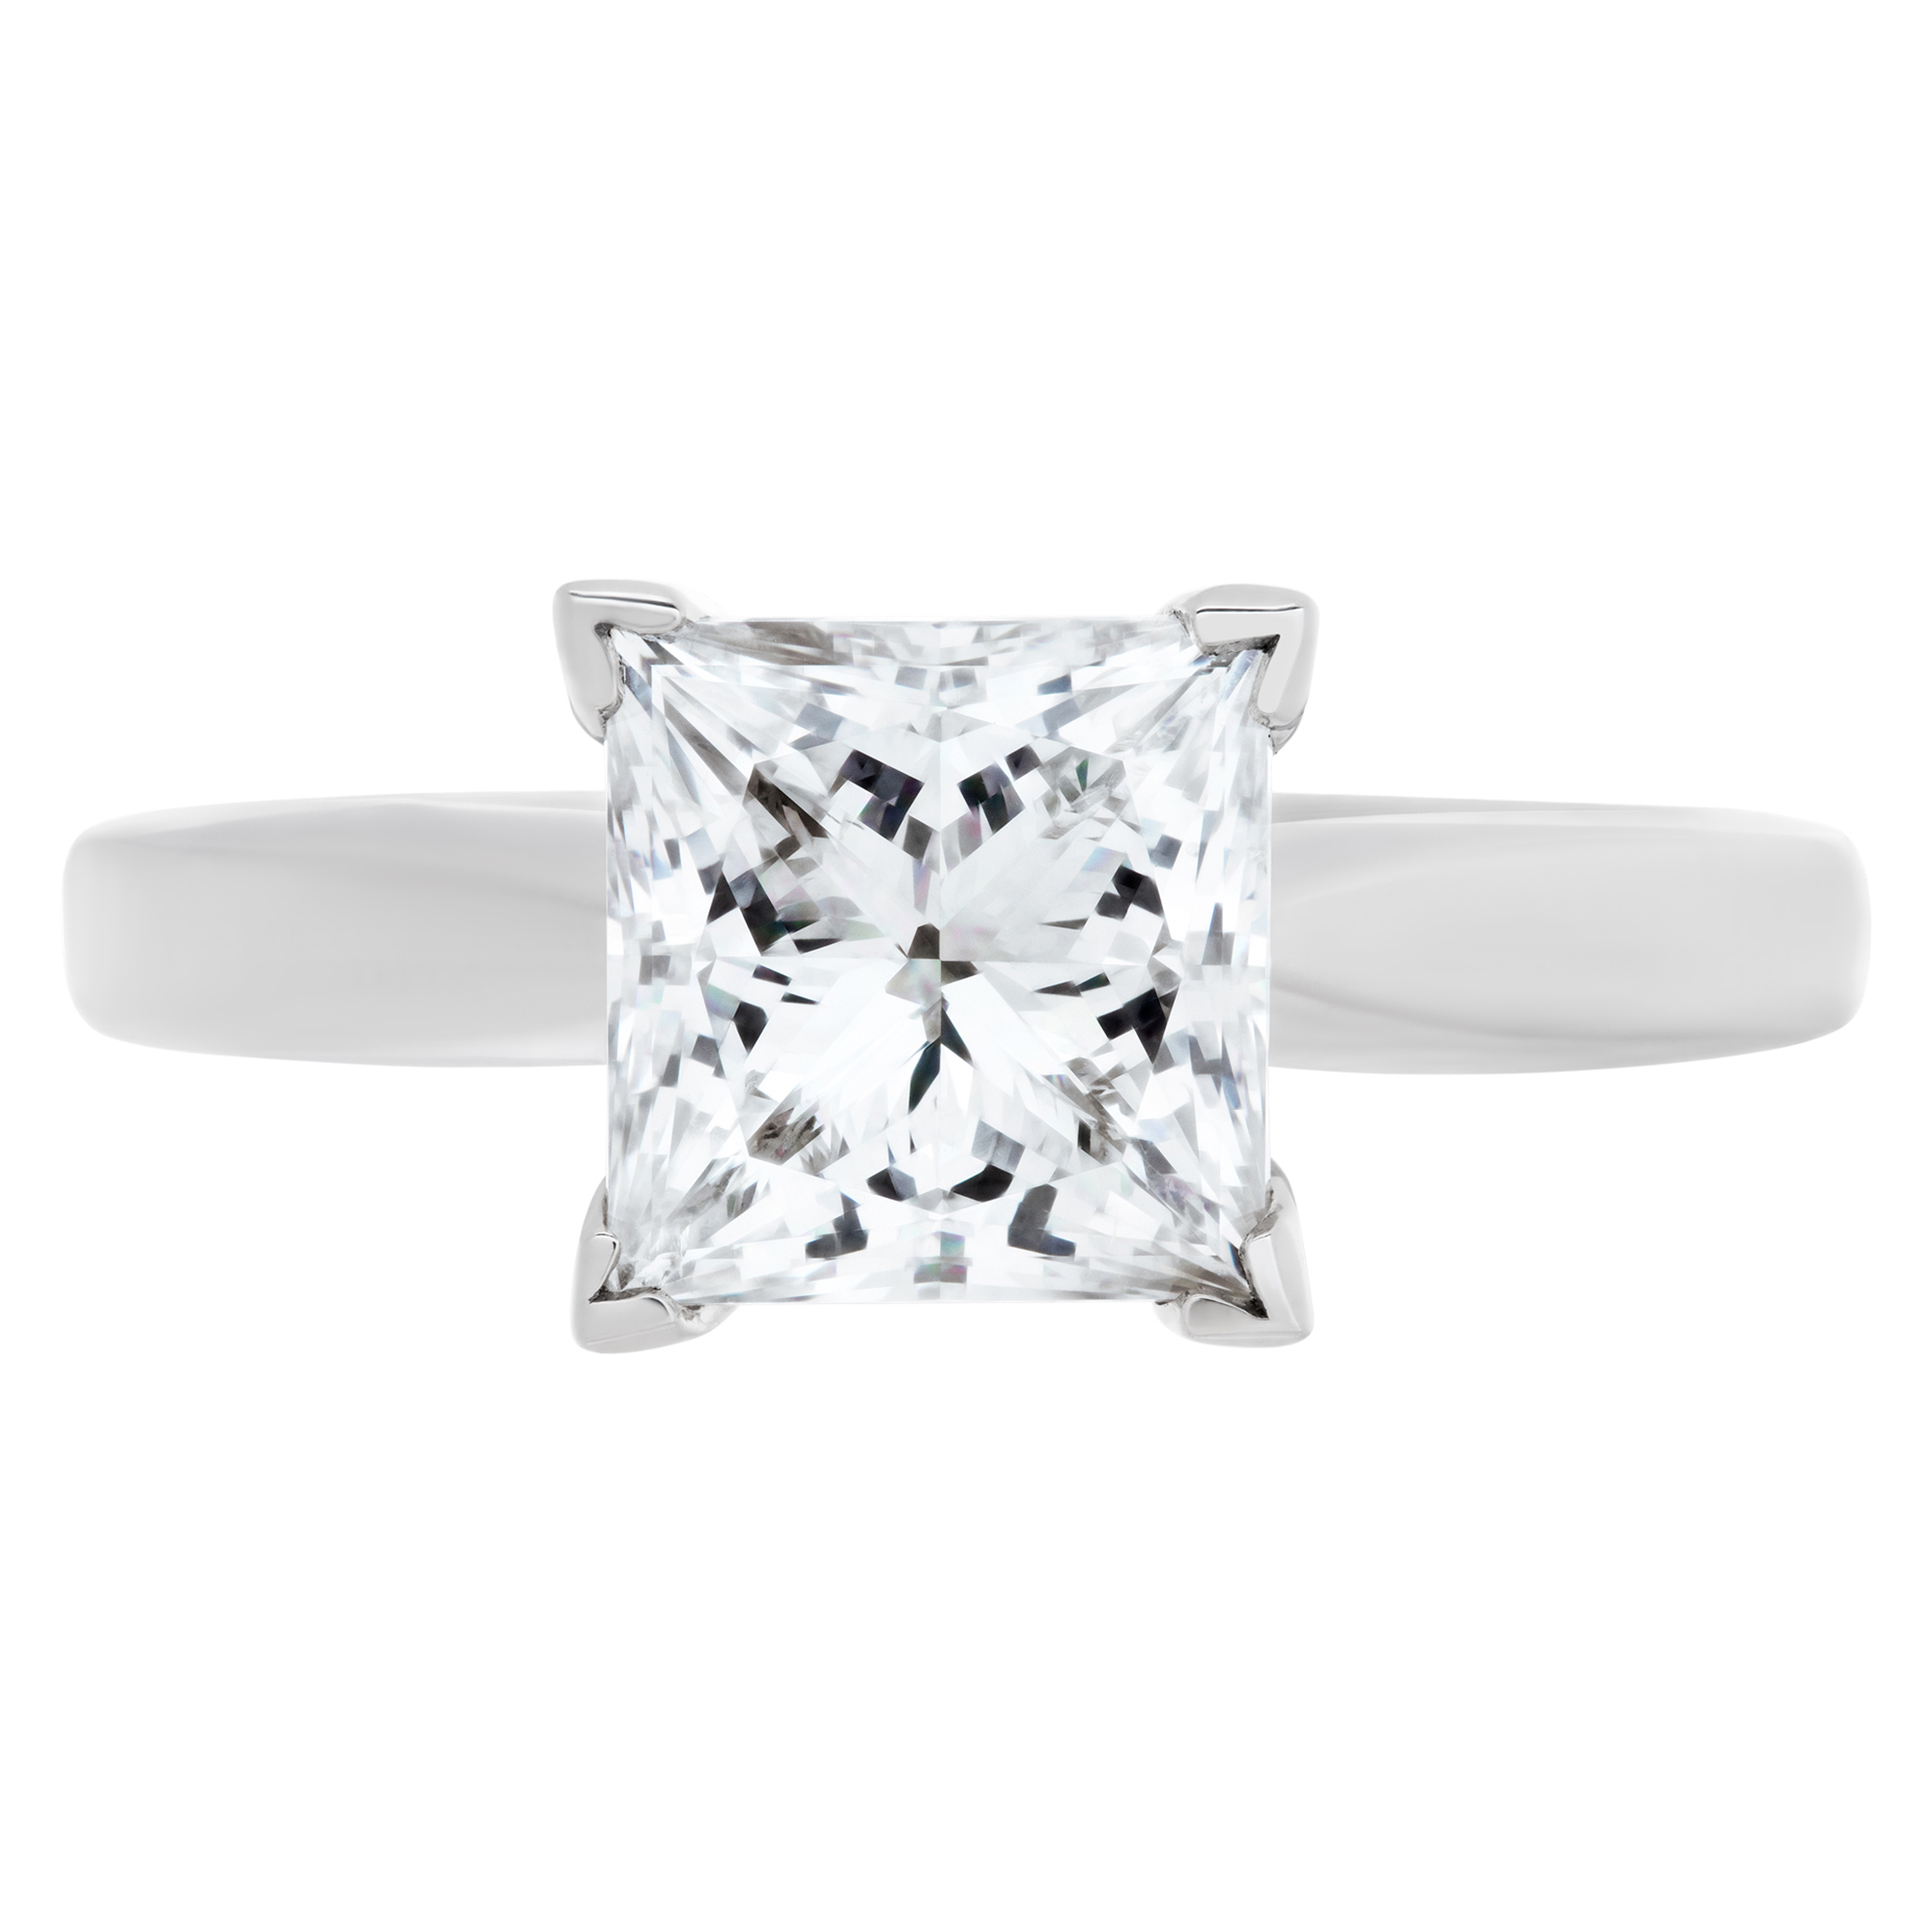 GIA certified princess cut diamond 2.09 carat (J color, SI1 clarity) solitaire ring image 2